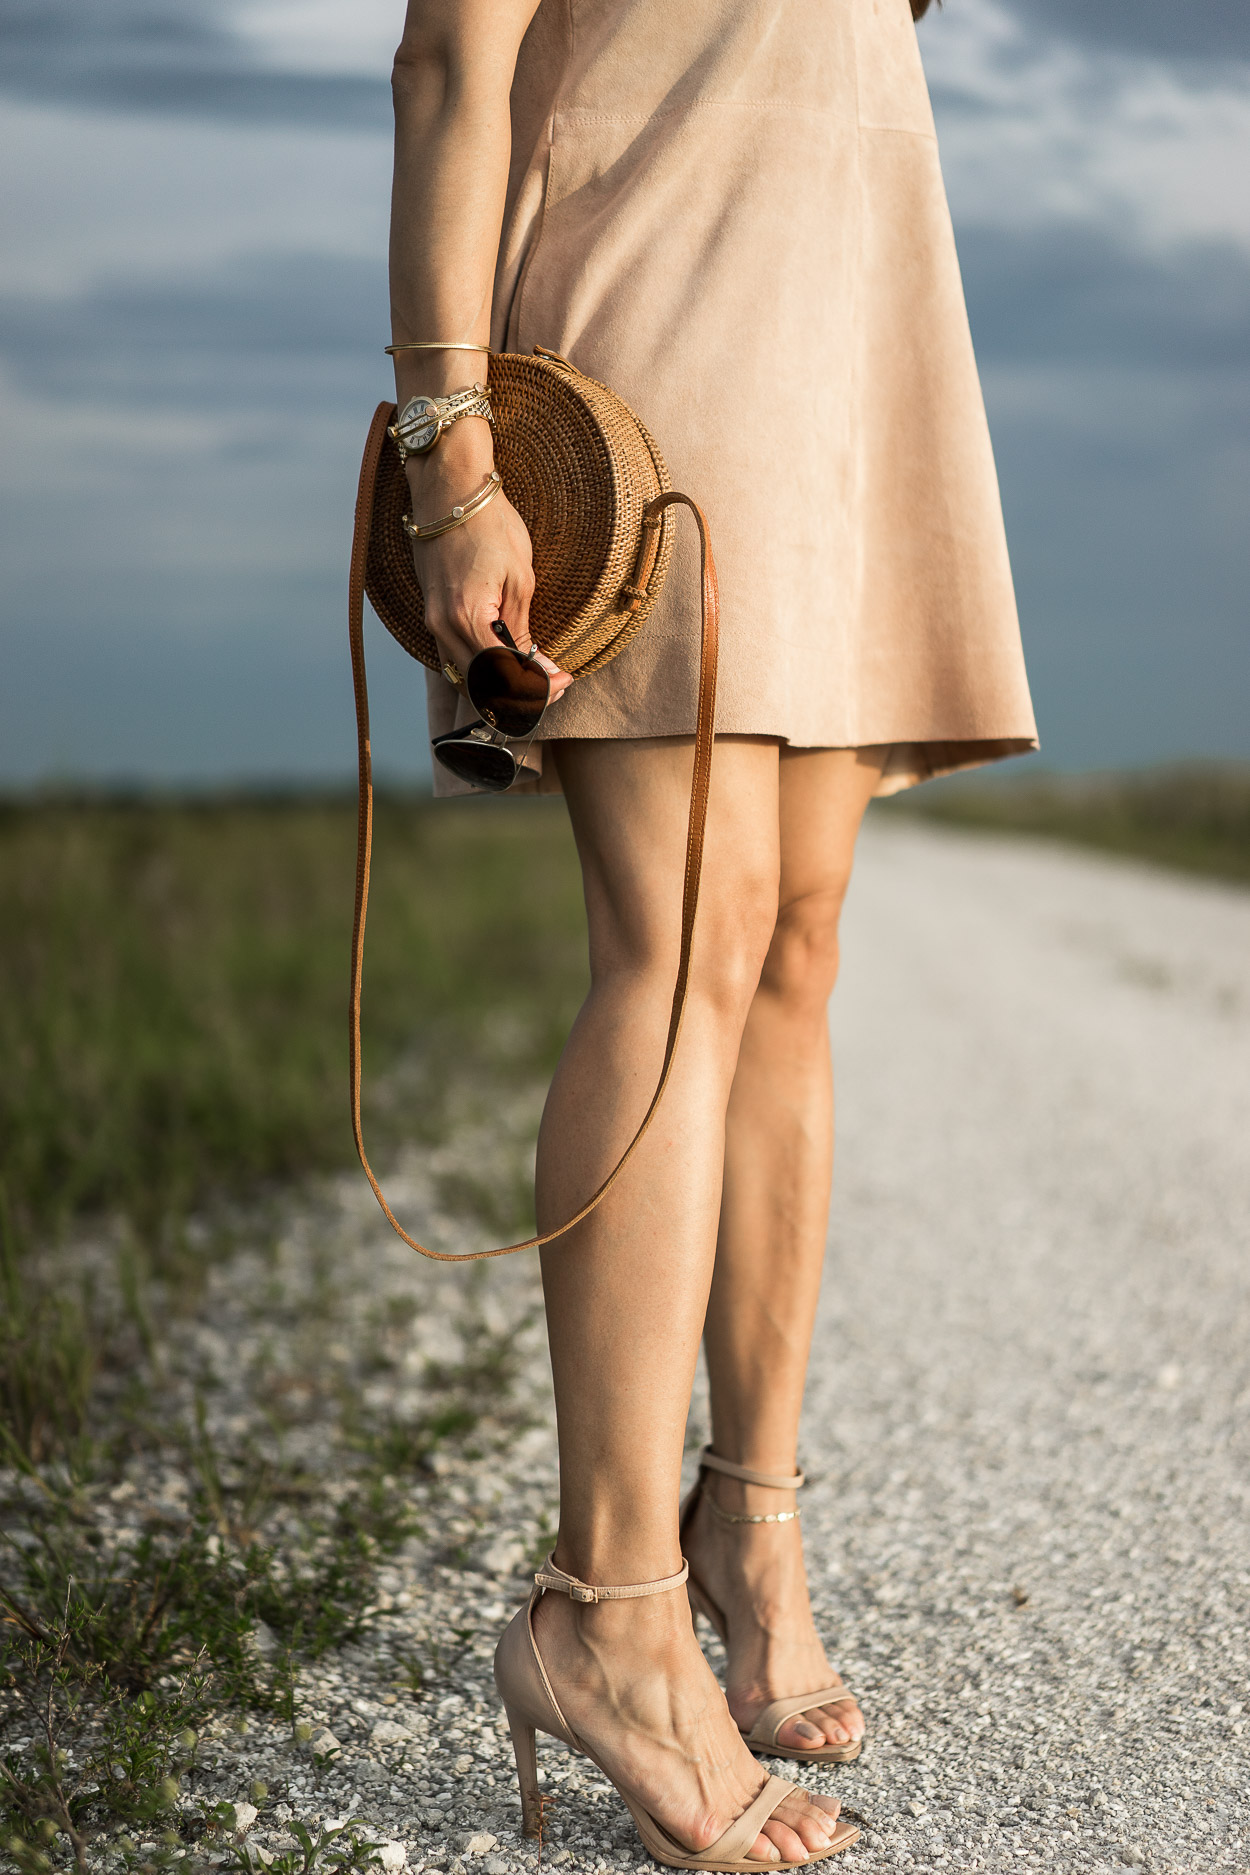 Blush suede dress and round basket bag are Summer must haves worn by AGlamLifestyle blogger Amanda